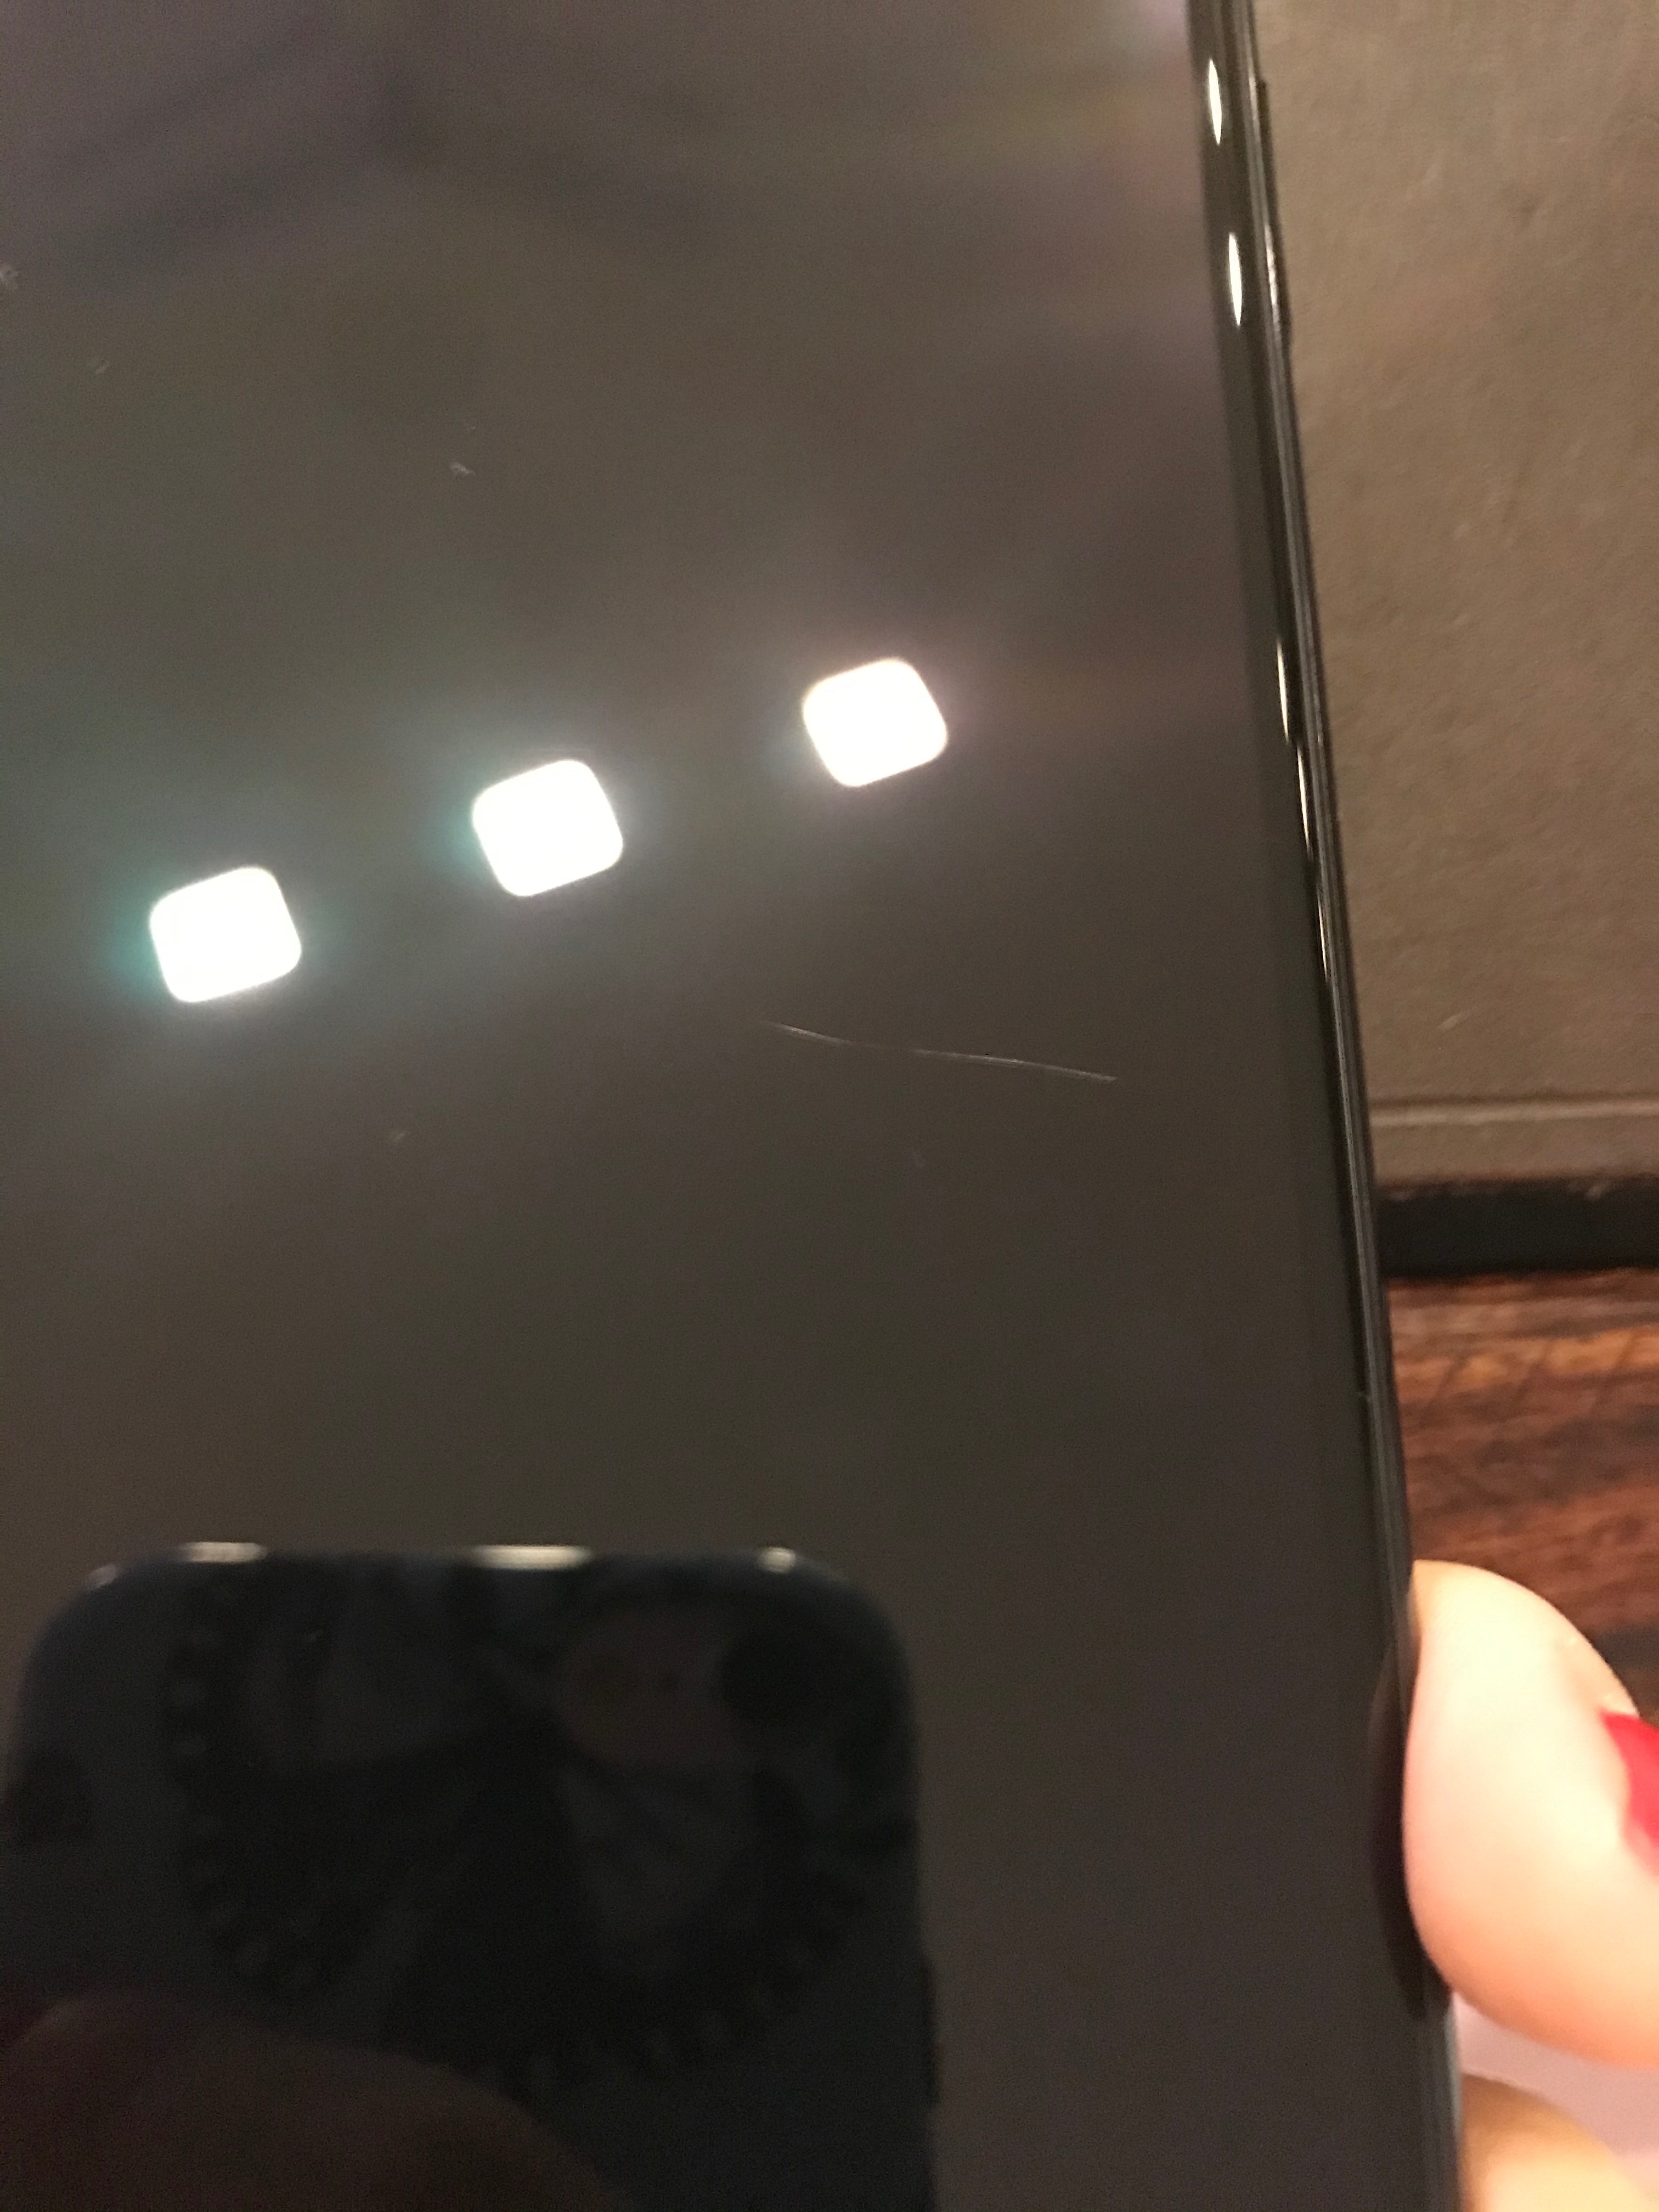 just paid $$$ to replace my screen - Apple Community